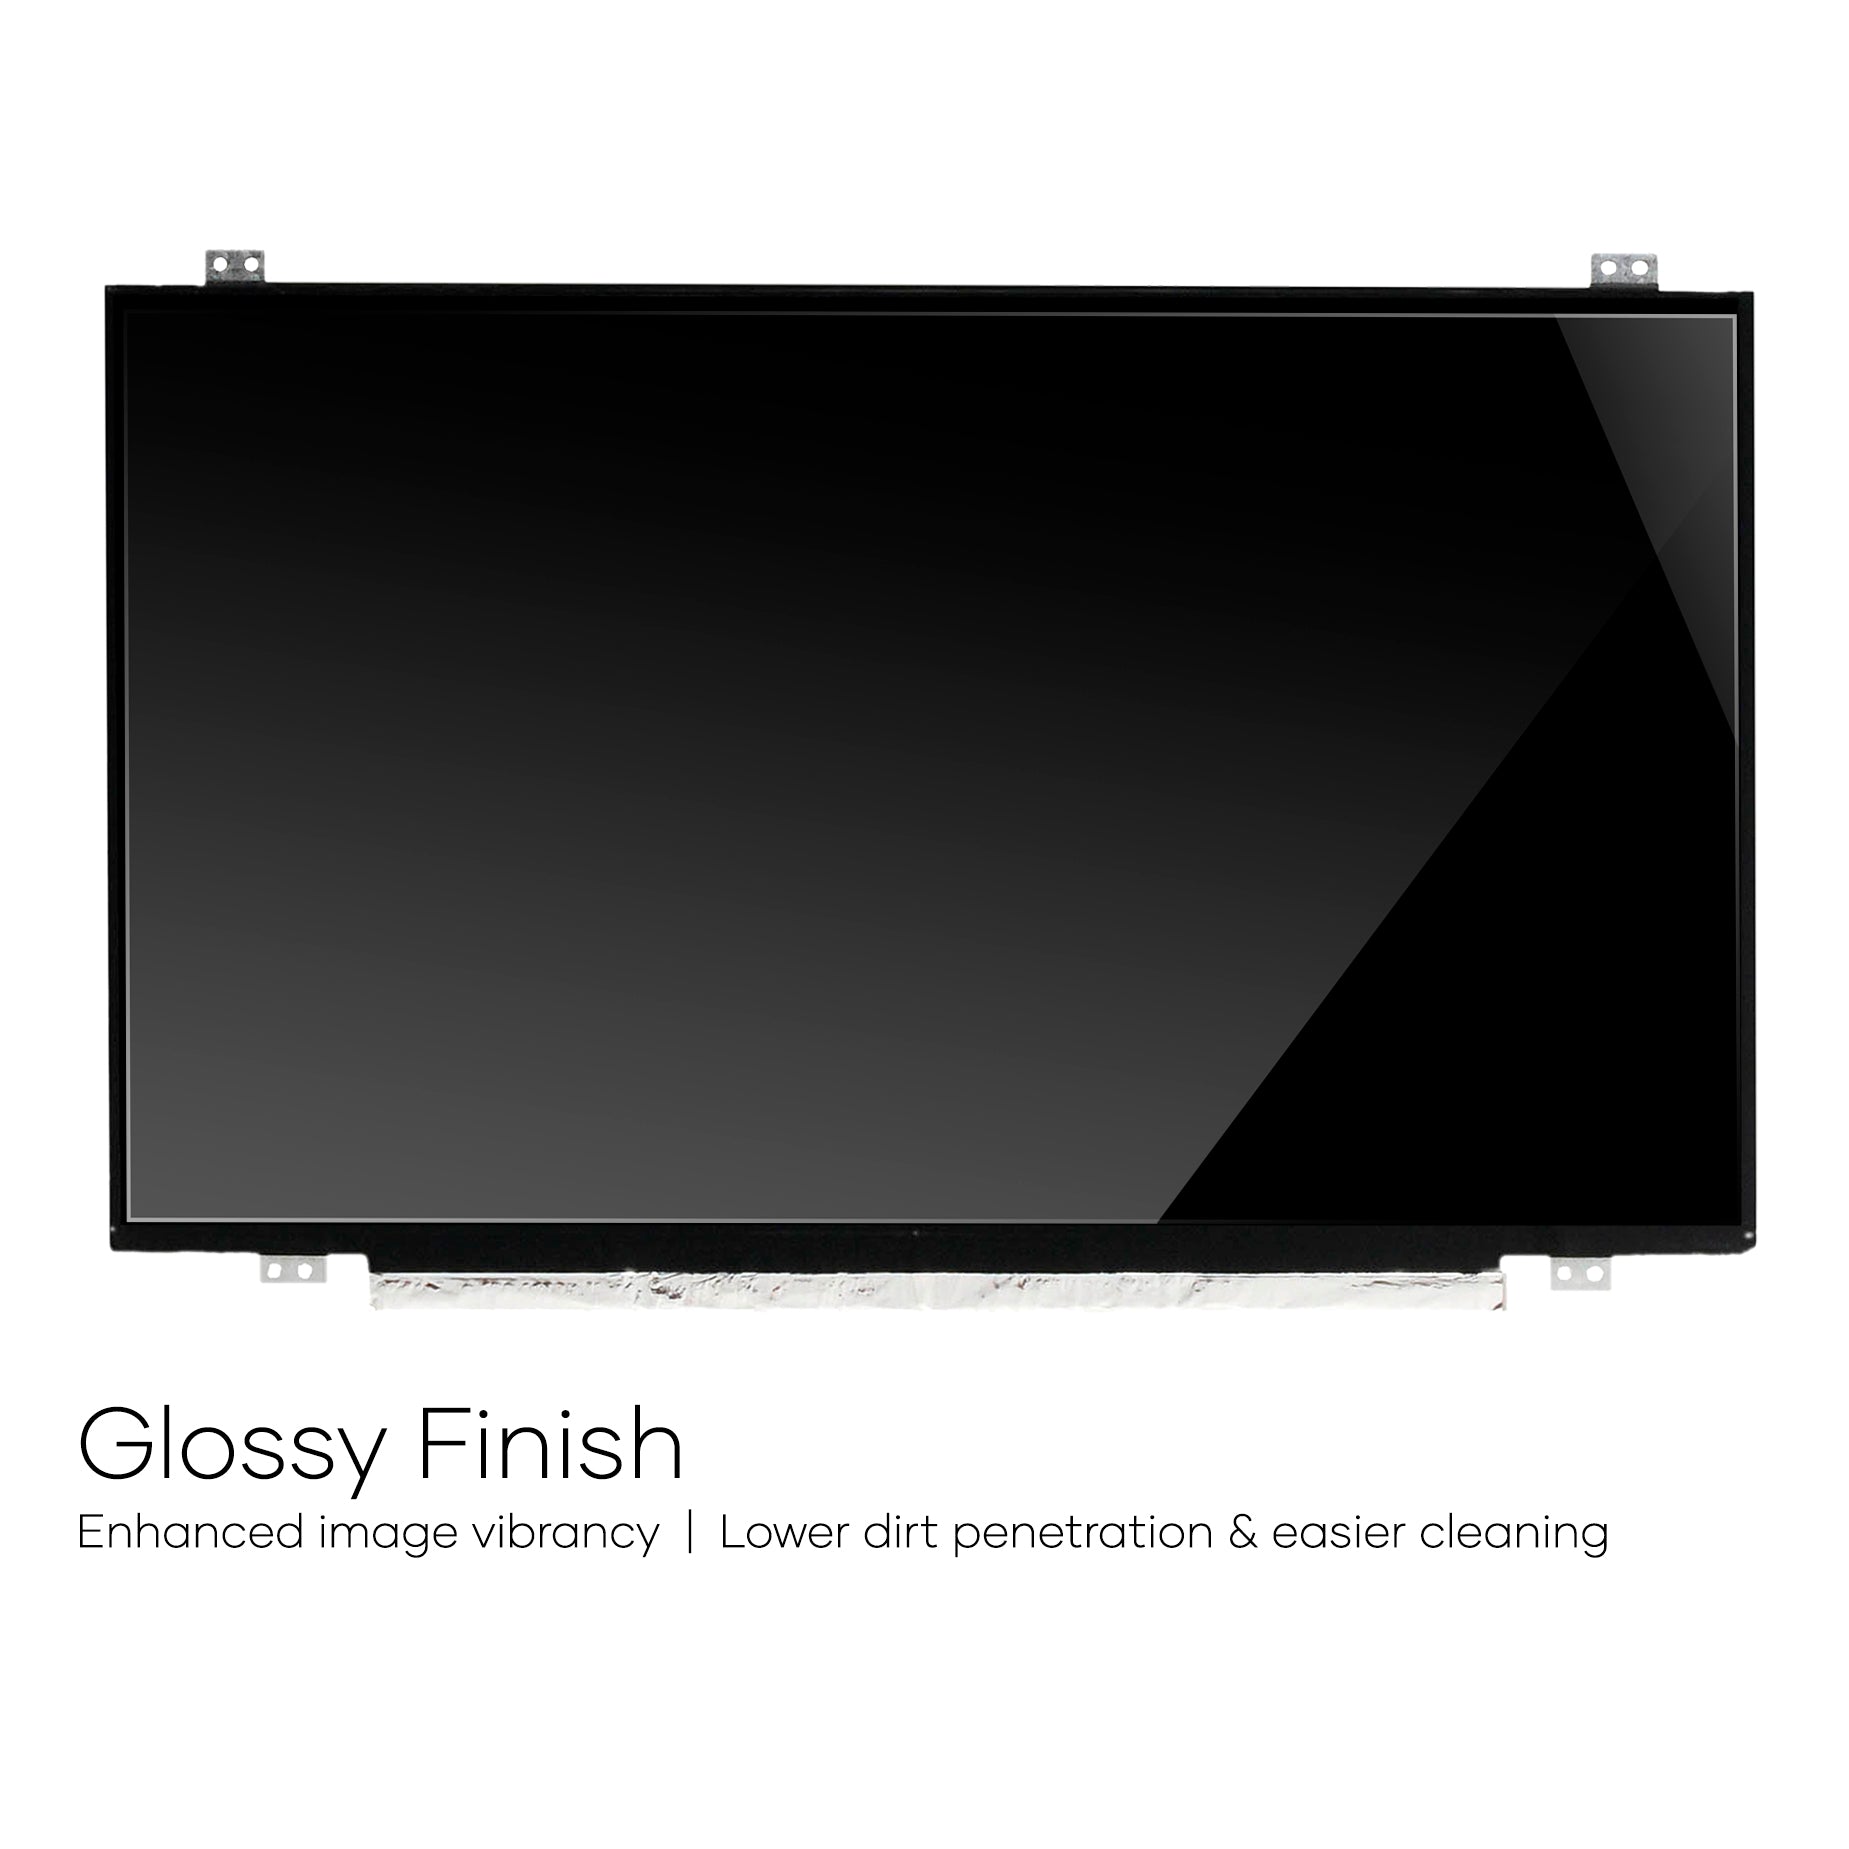 Screen Replacement for N140BGE-EB3 REV.C3 HD 1366x768 Glossy LCD LED Display